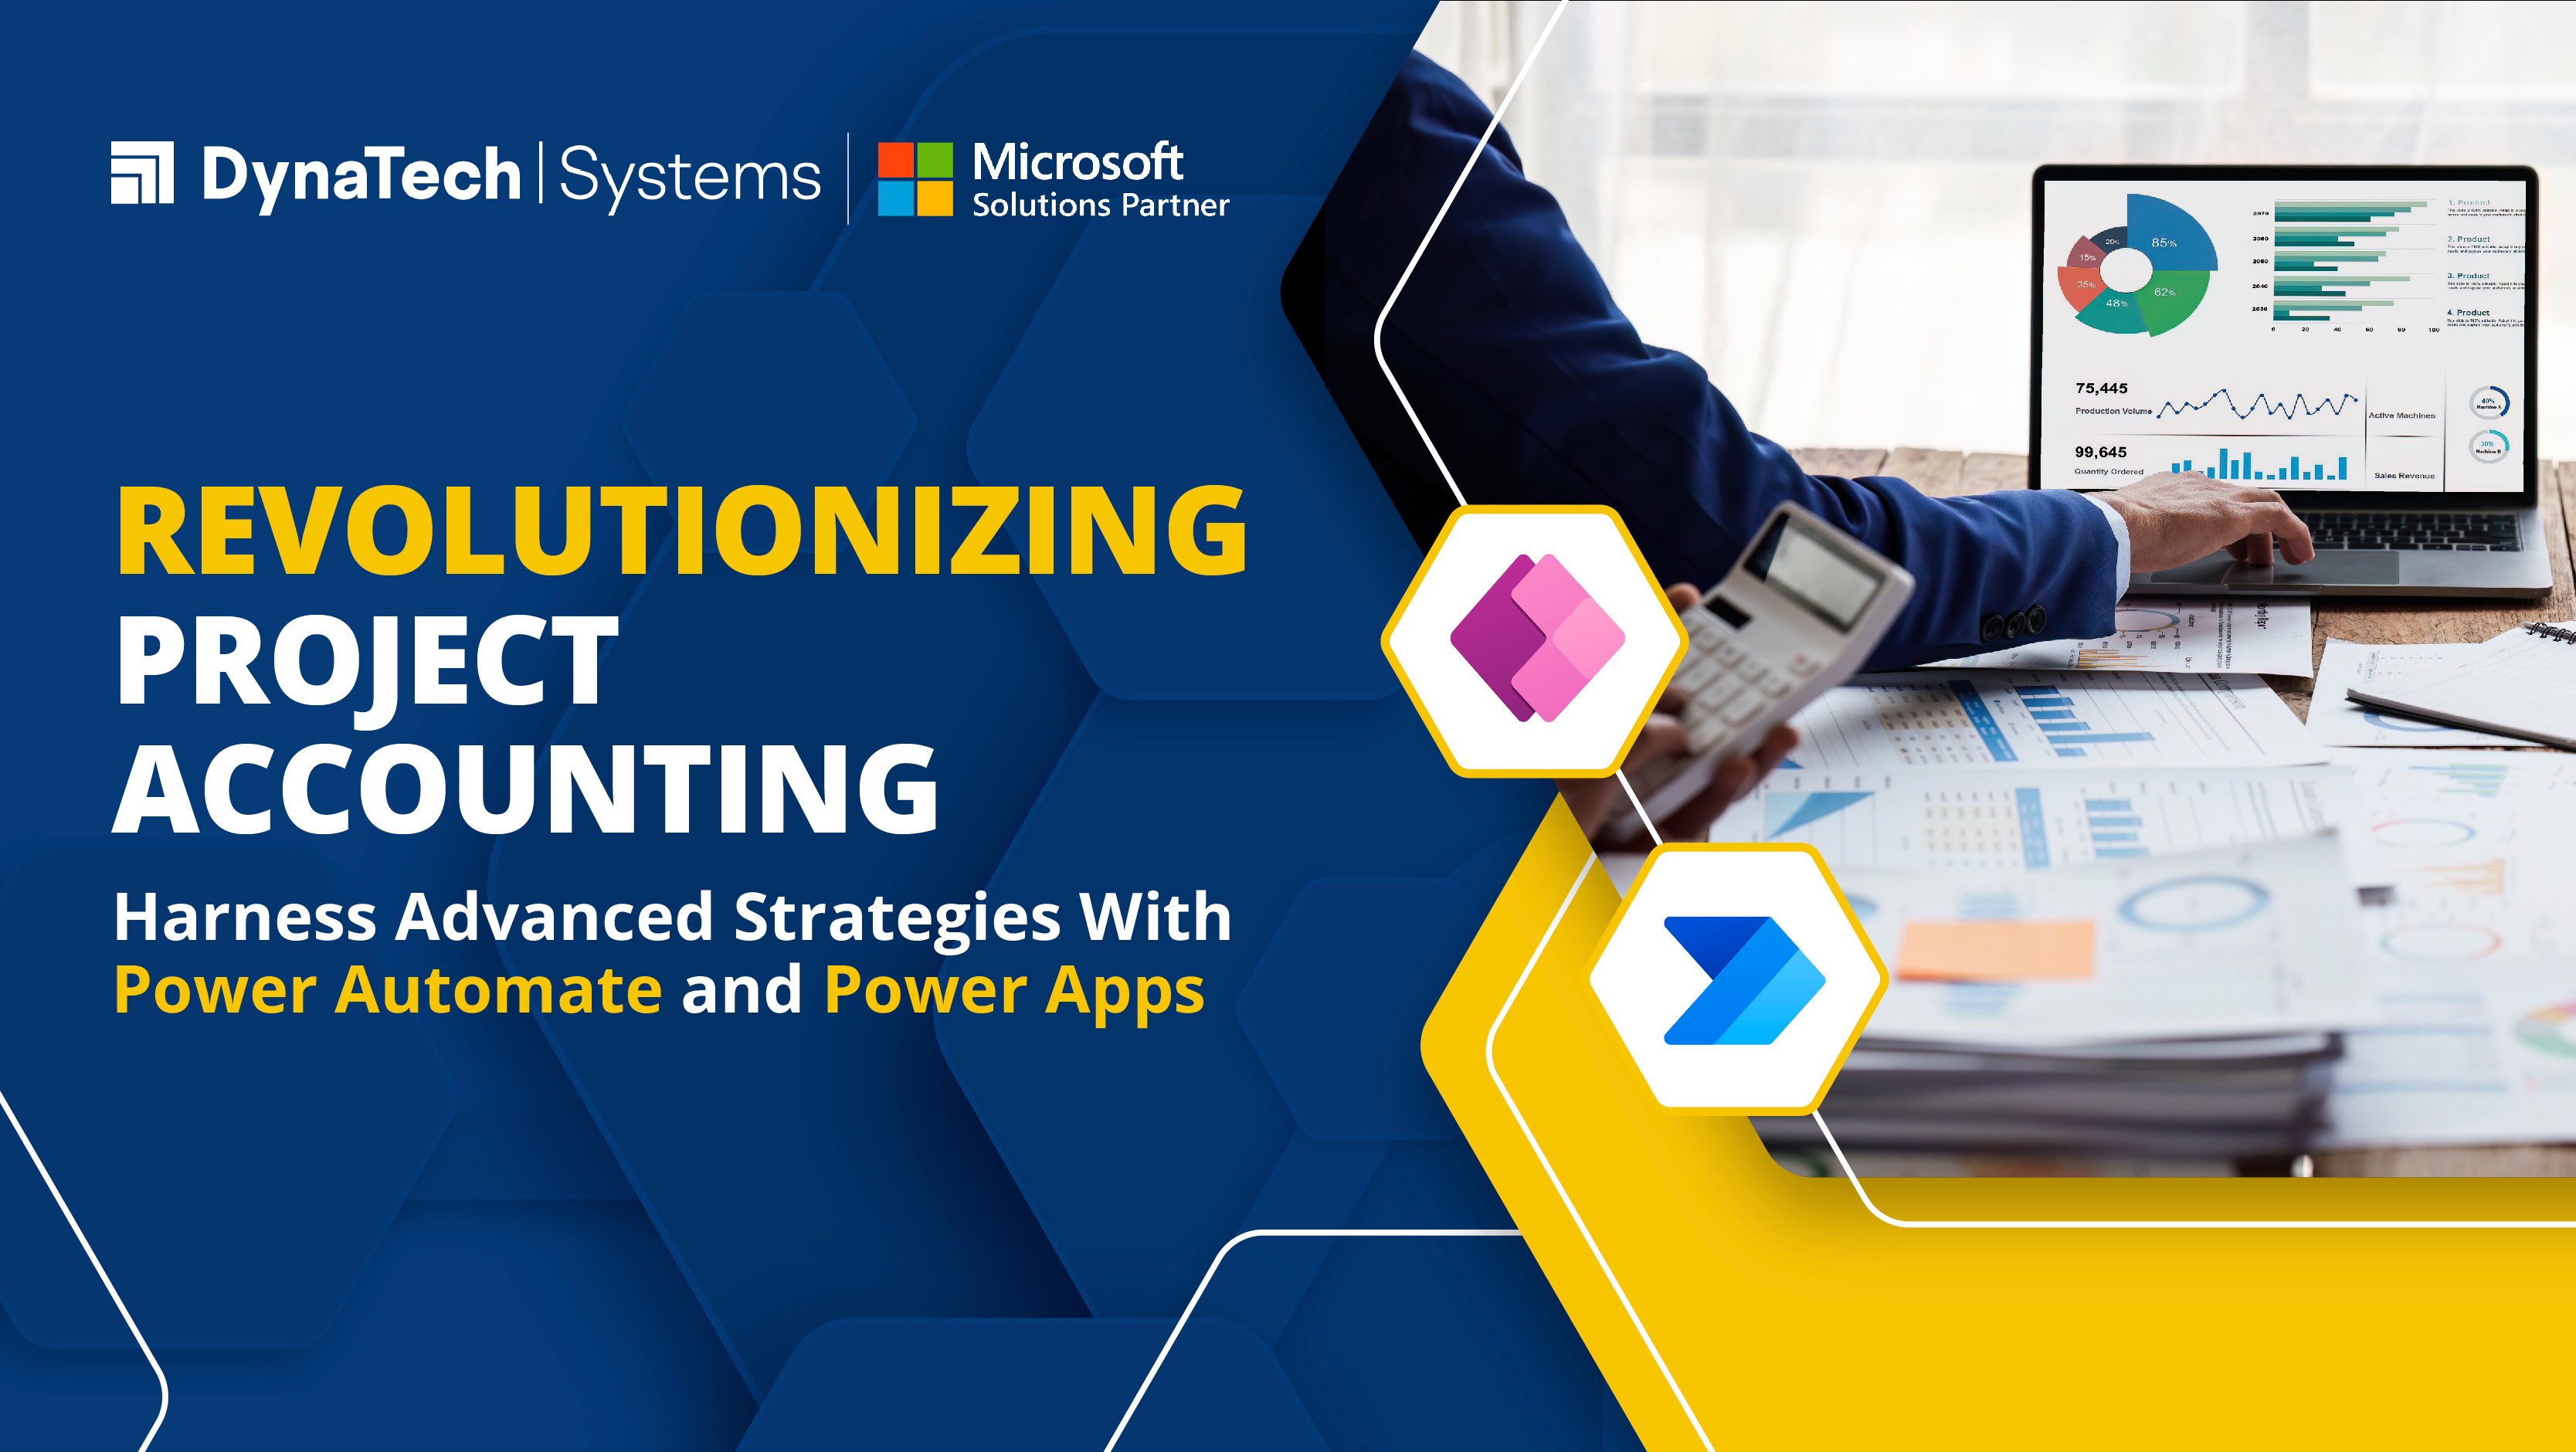 Revolutionizing Project Accounting – Harness Advanced Strategies With Power Automate and Power Apps